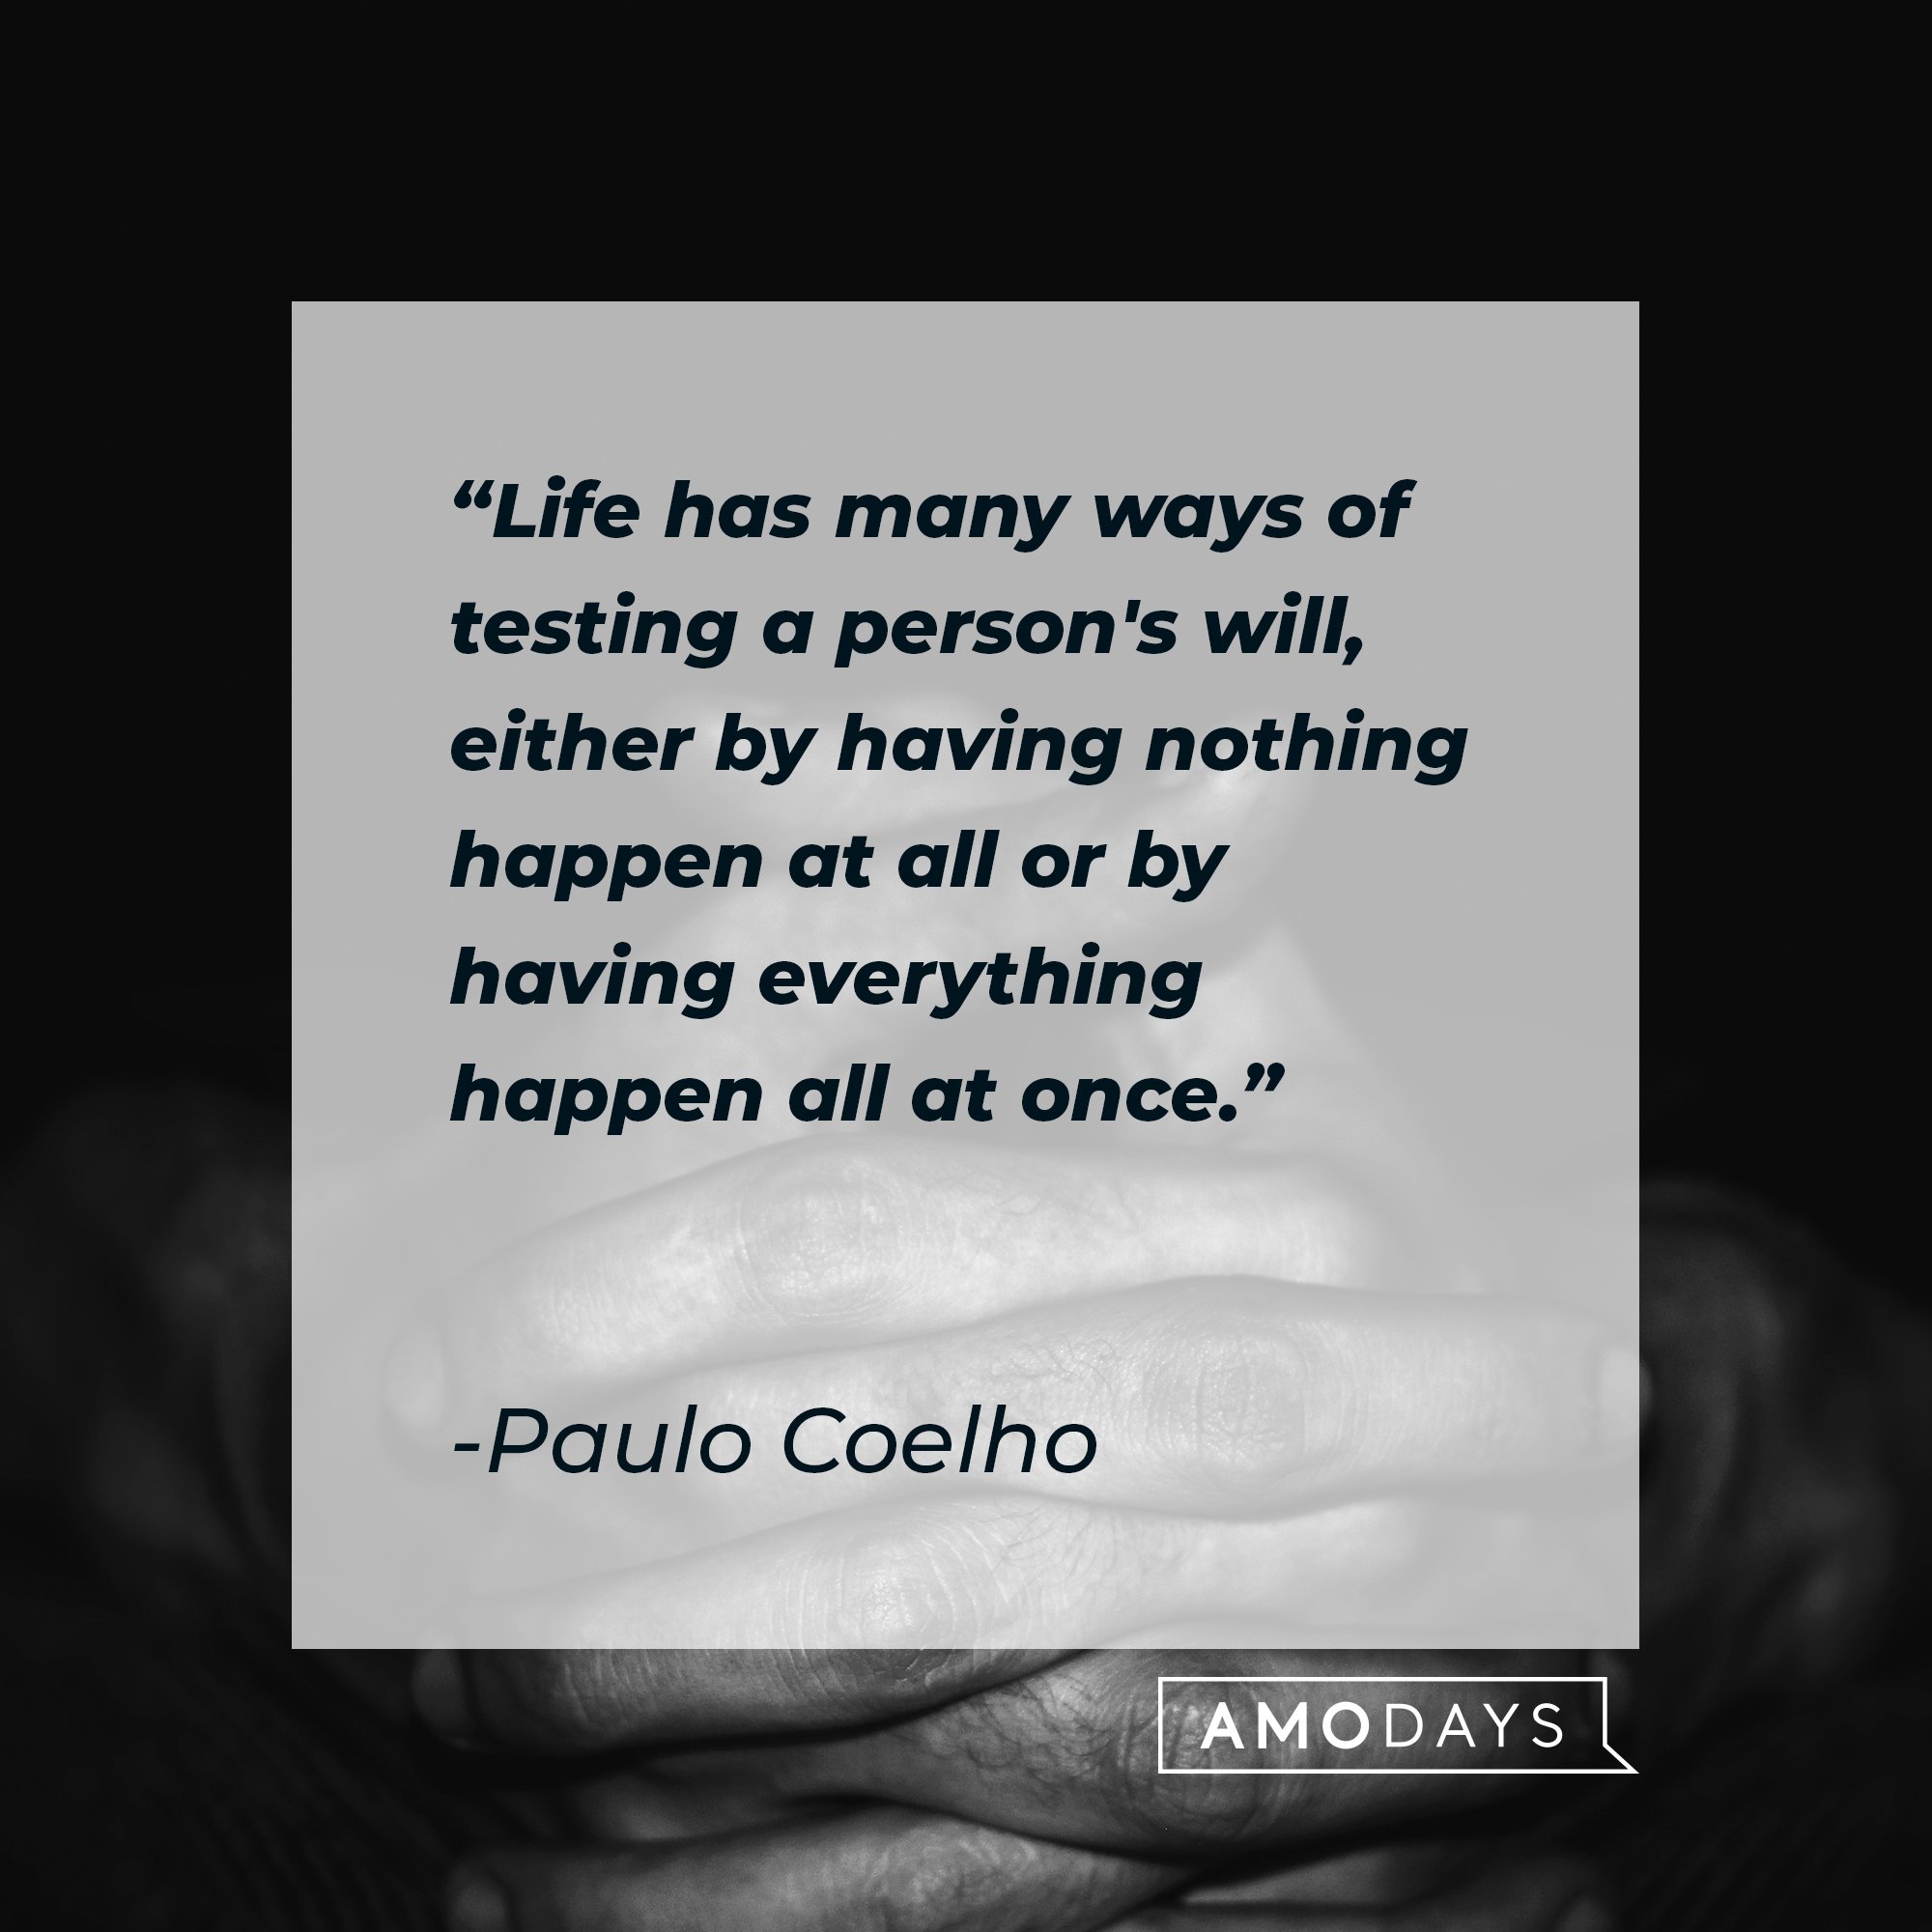 Paulo Coelho’s quote: "Life has many ways of testing a person's will, either by having nothing happen at all or by having everything happen all at once." | Image: AmoDays  